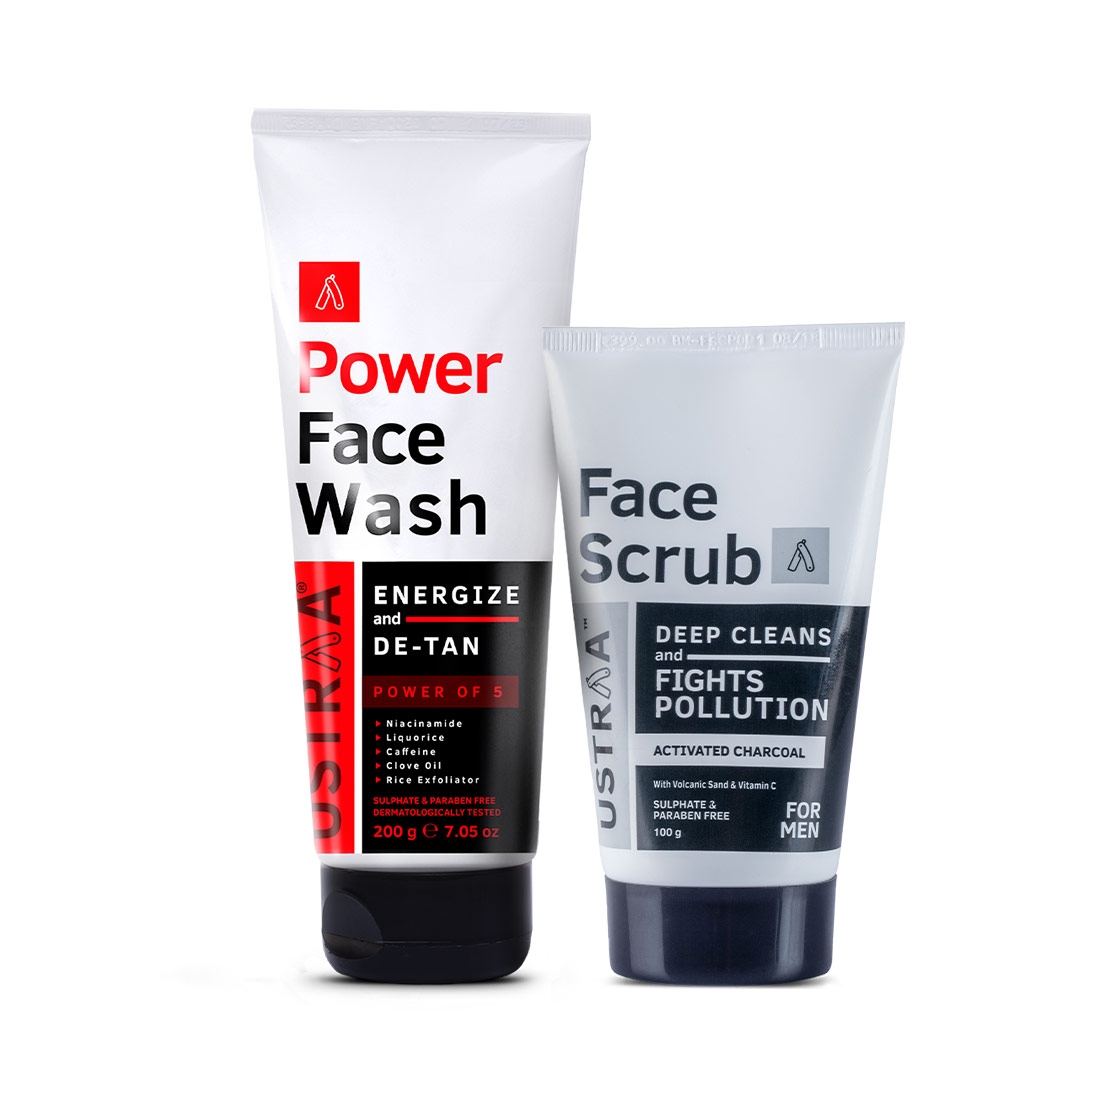 Ustraa Power Face Wash De-Tan - 200g & Activated Charcoal Face Scrub - 100g